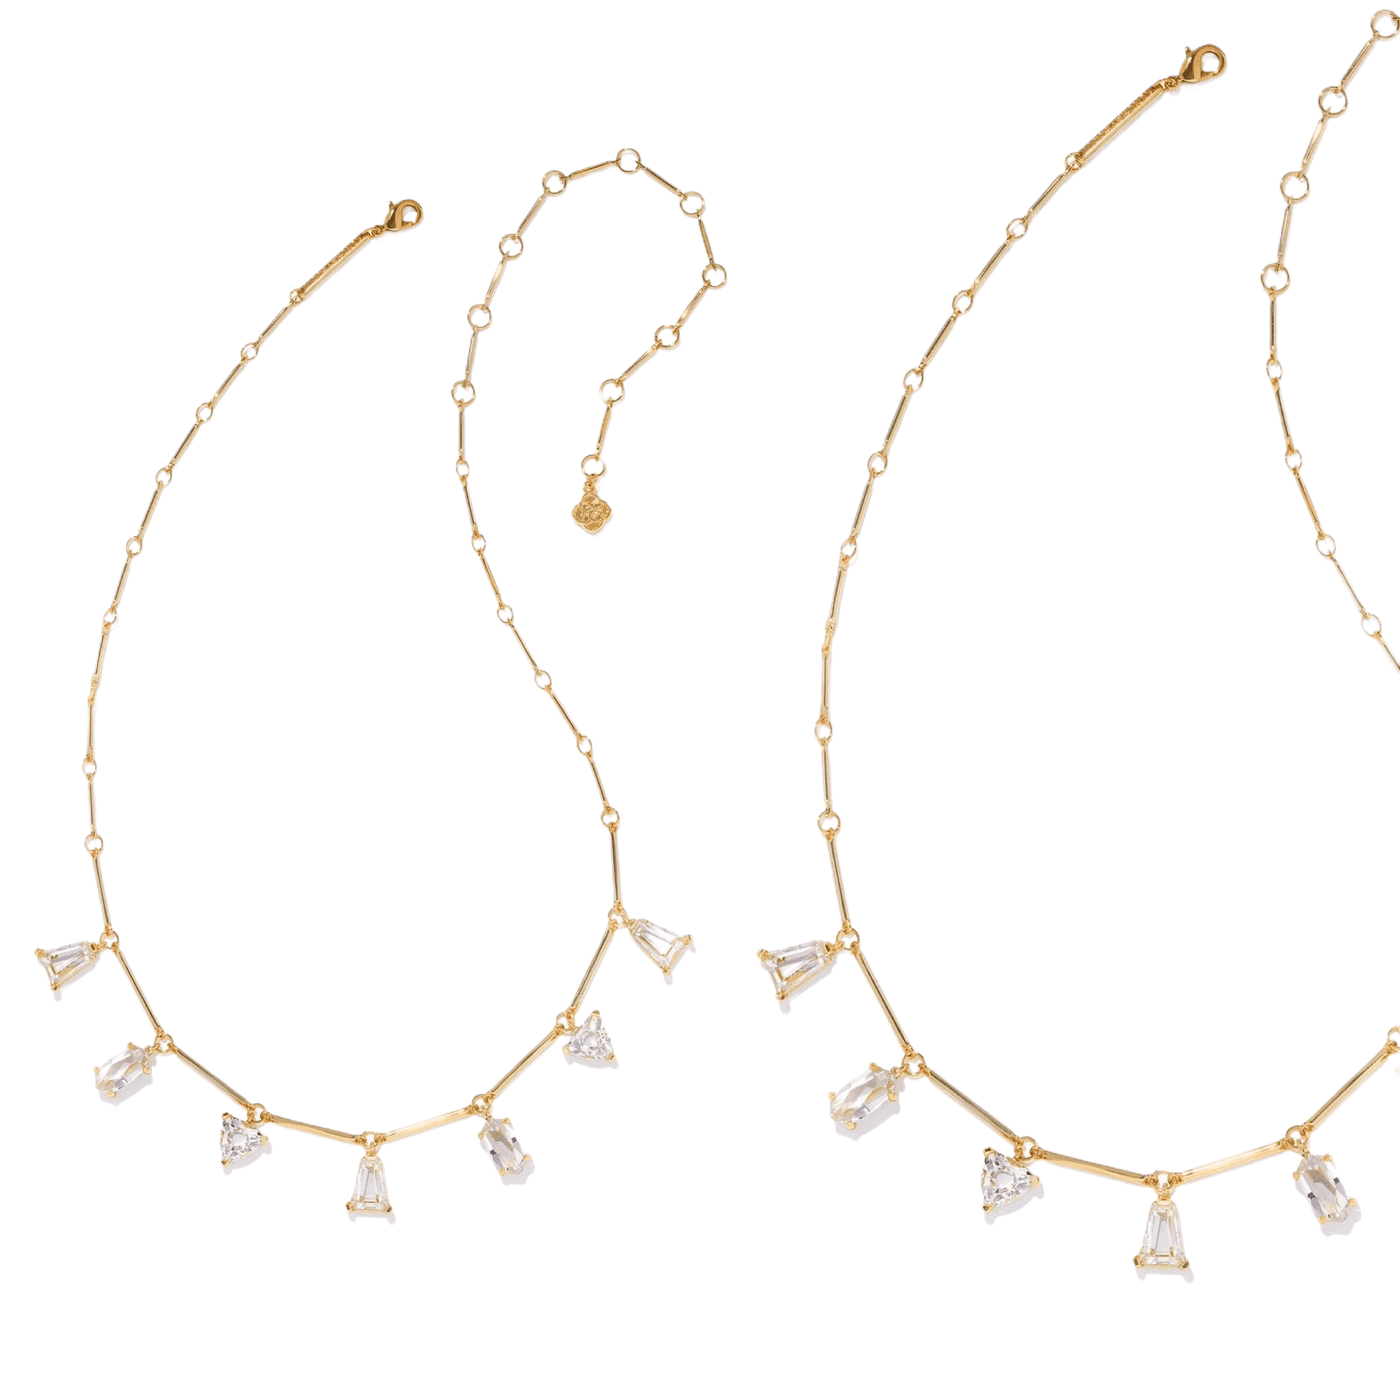 Kendra Scott Blair Gold Jewel Strand Necklace in White Crystal